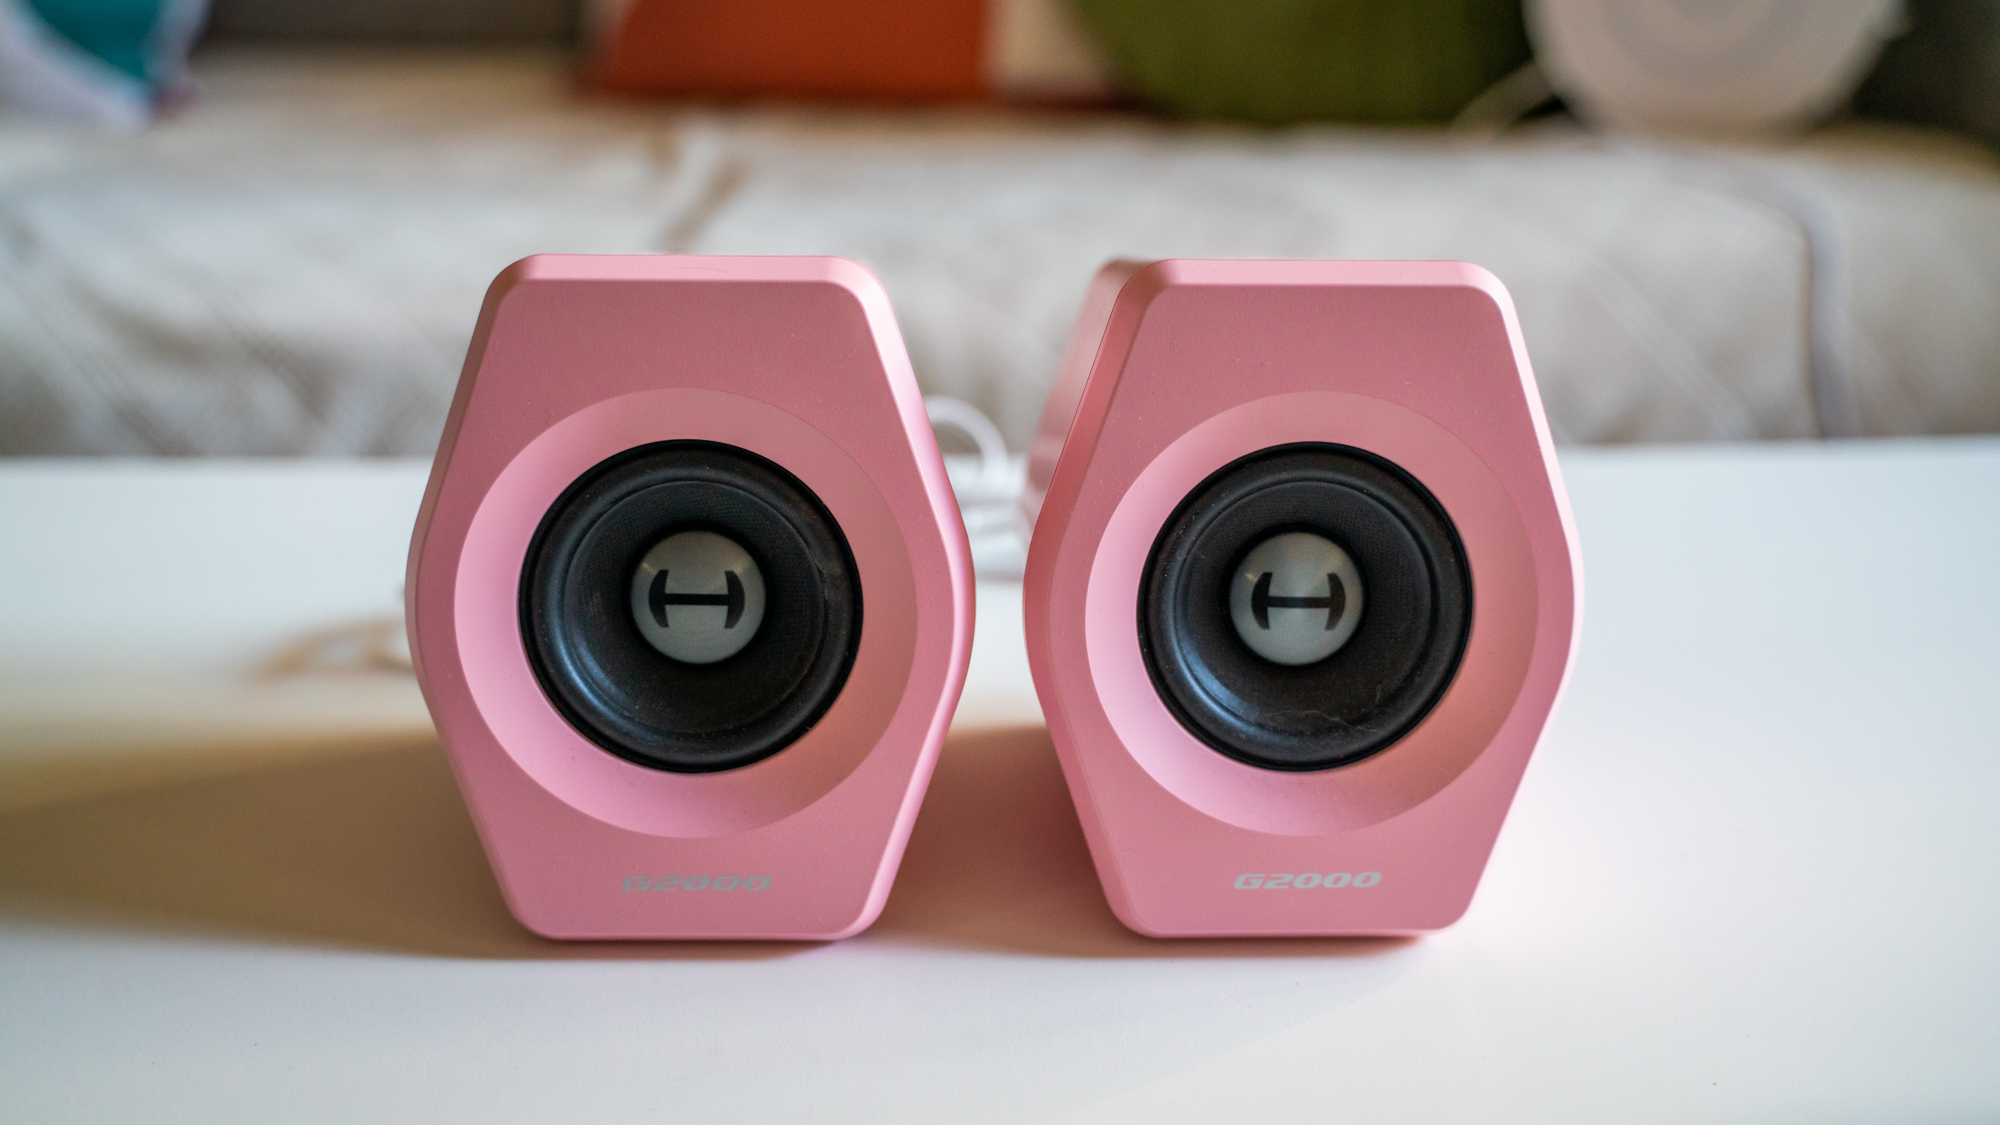 I keep seeing people recommend edifier speakers, are these them